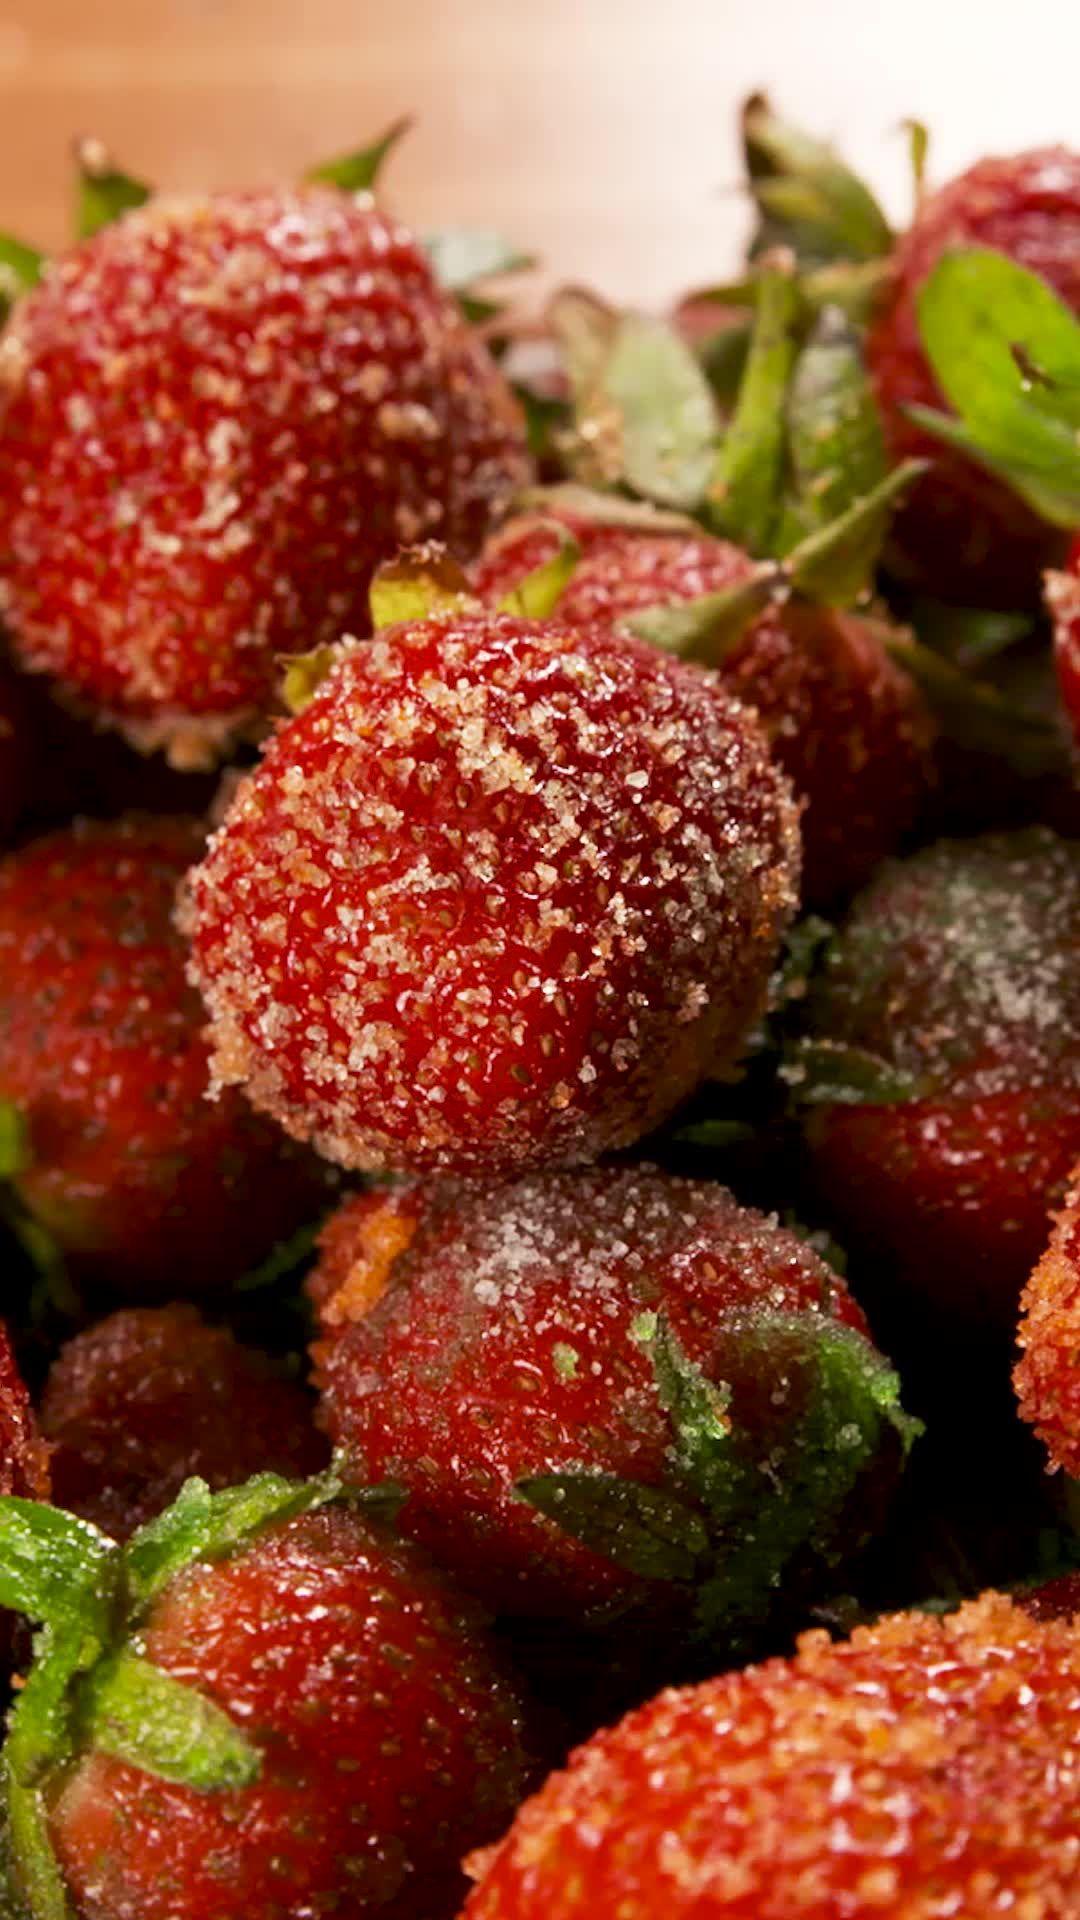 Sour Patch Strawberries How To Make Sour Patch Strawberries